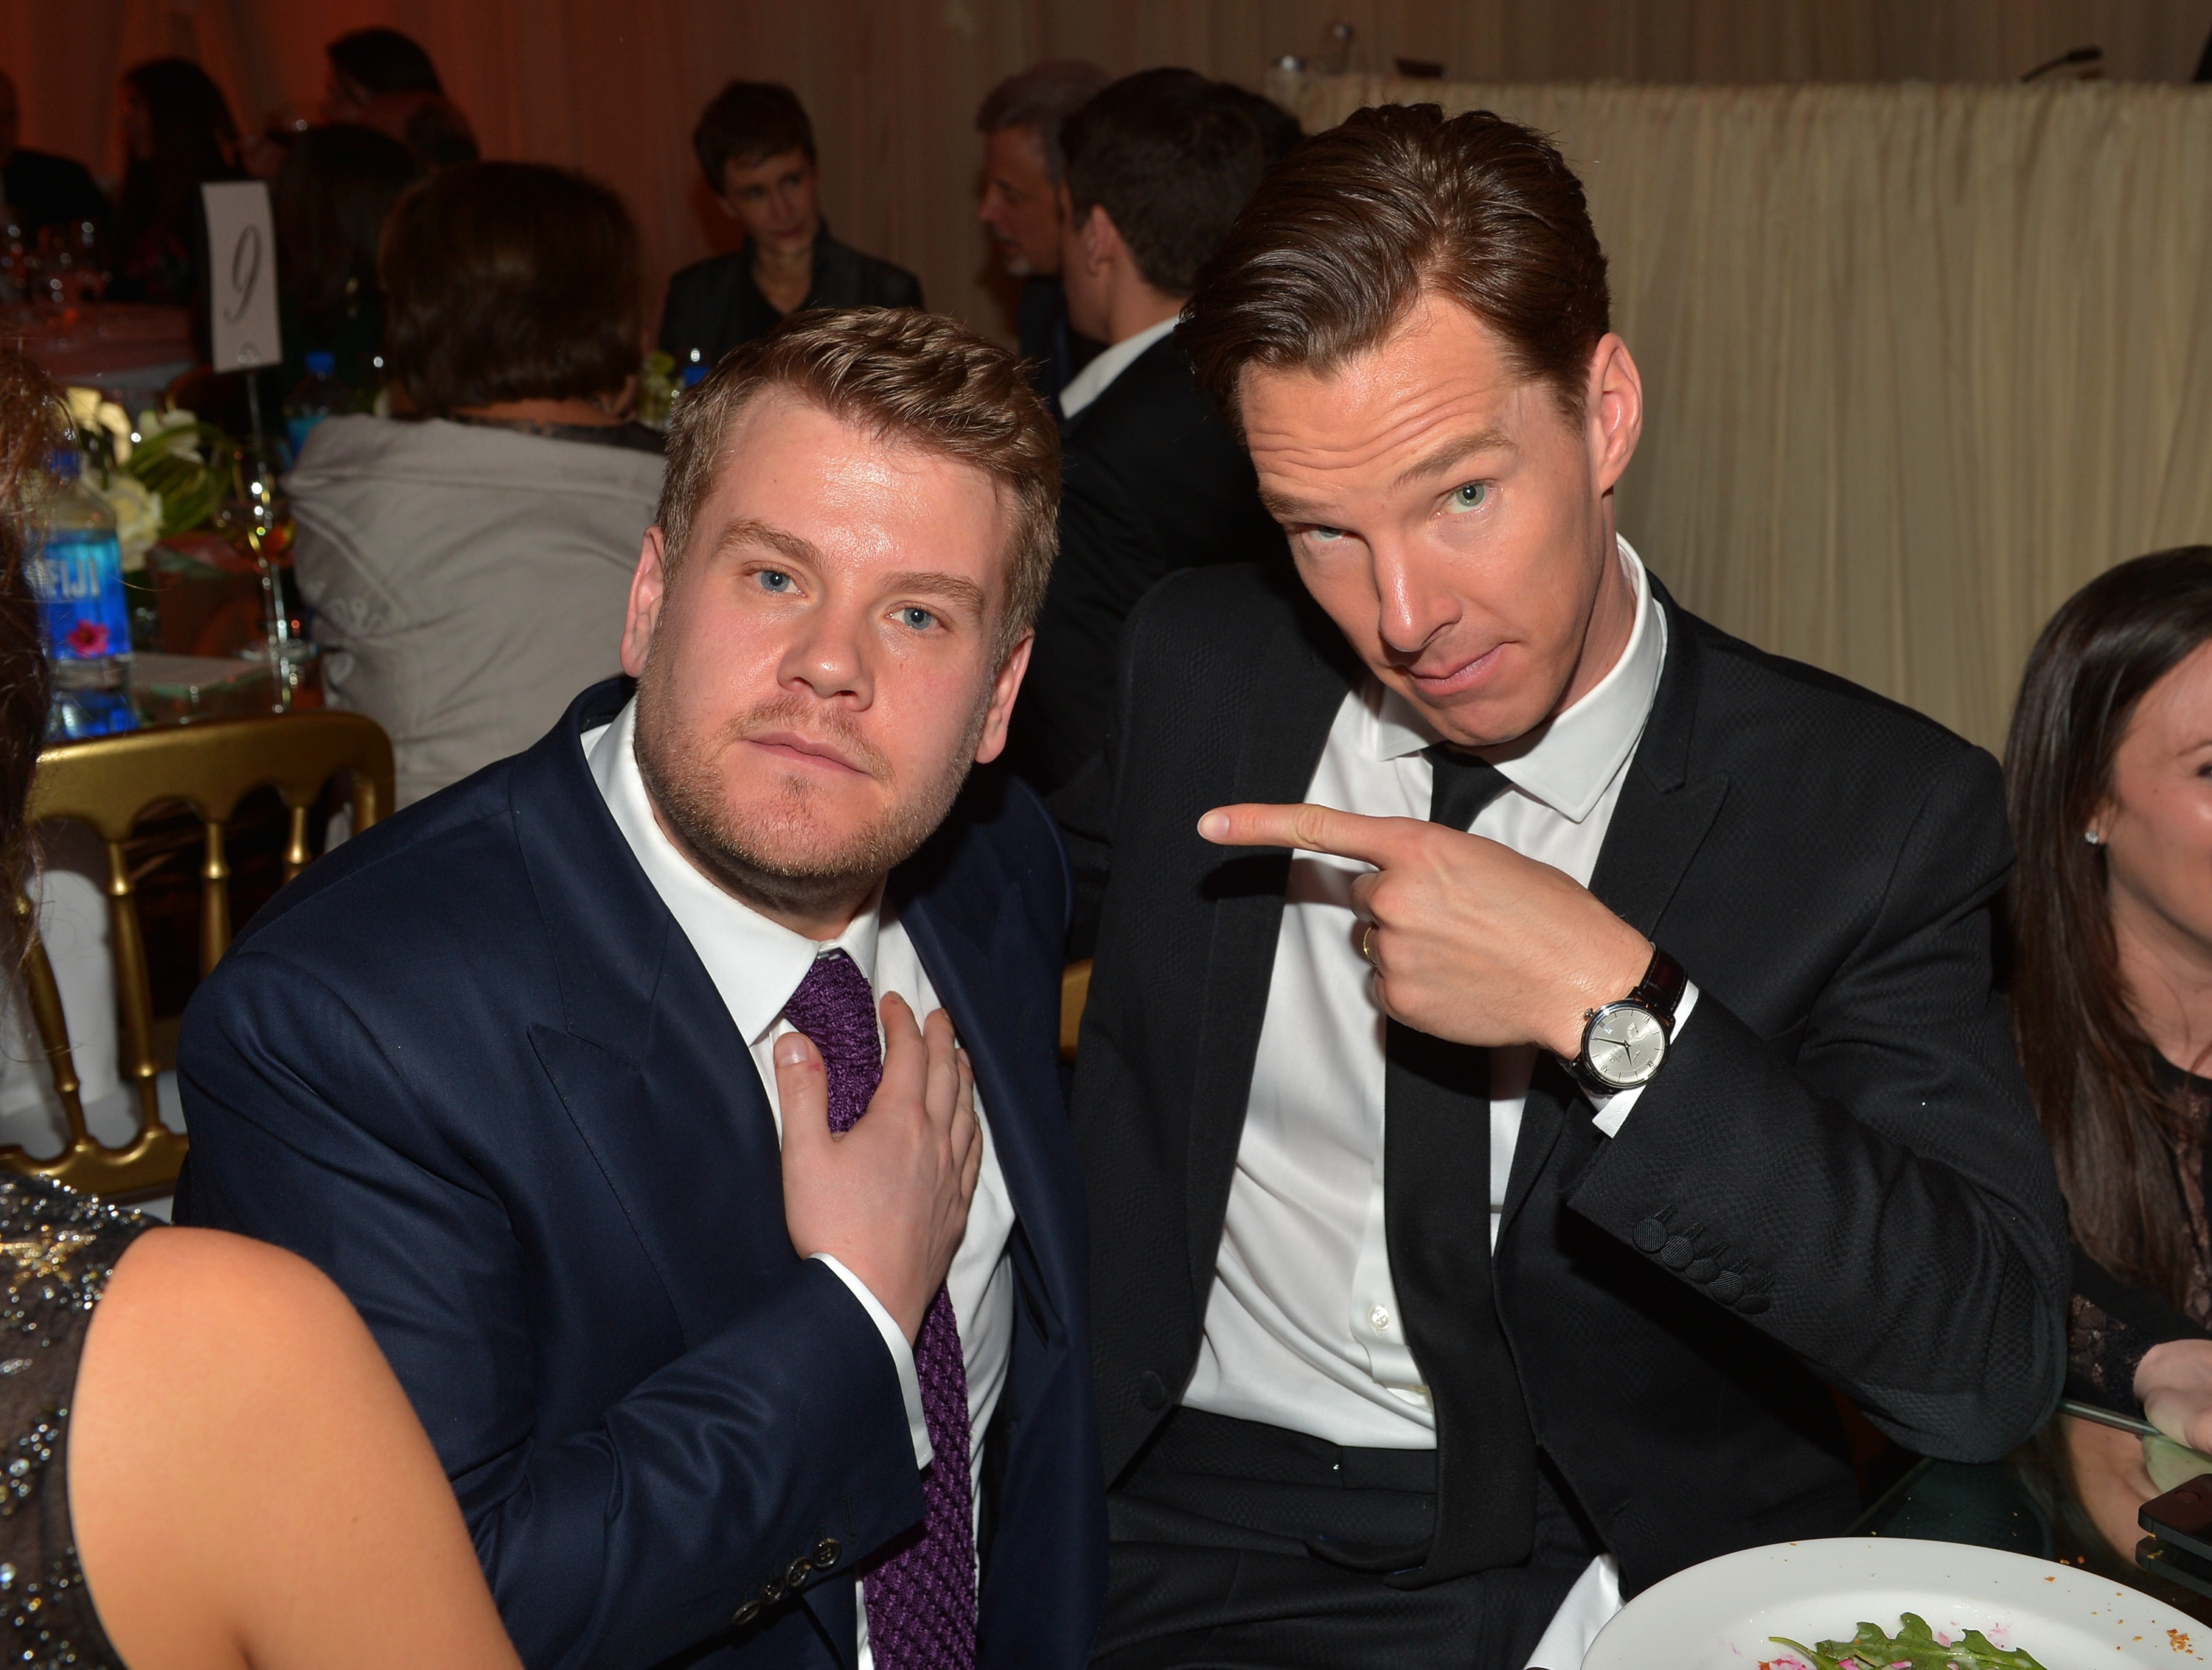 Actor/comedian James Corden (L) and actor Benedict Cumberbatch attend The Weinstein Company's Academy Awards Nominees Dinner